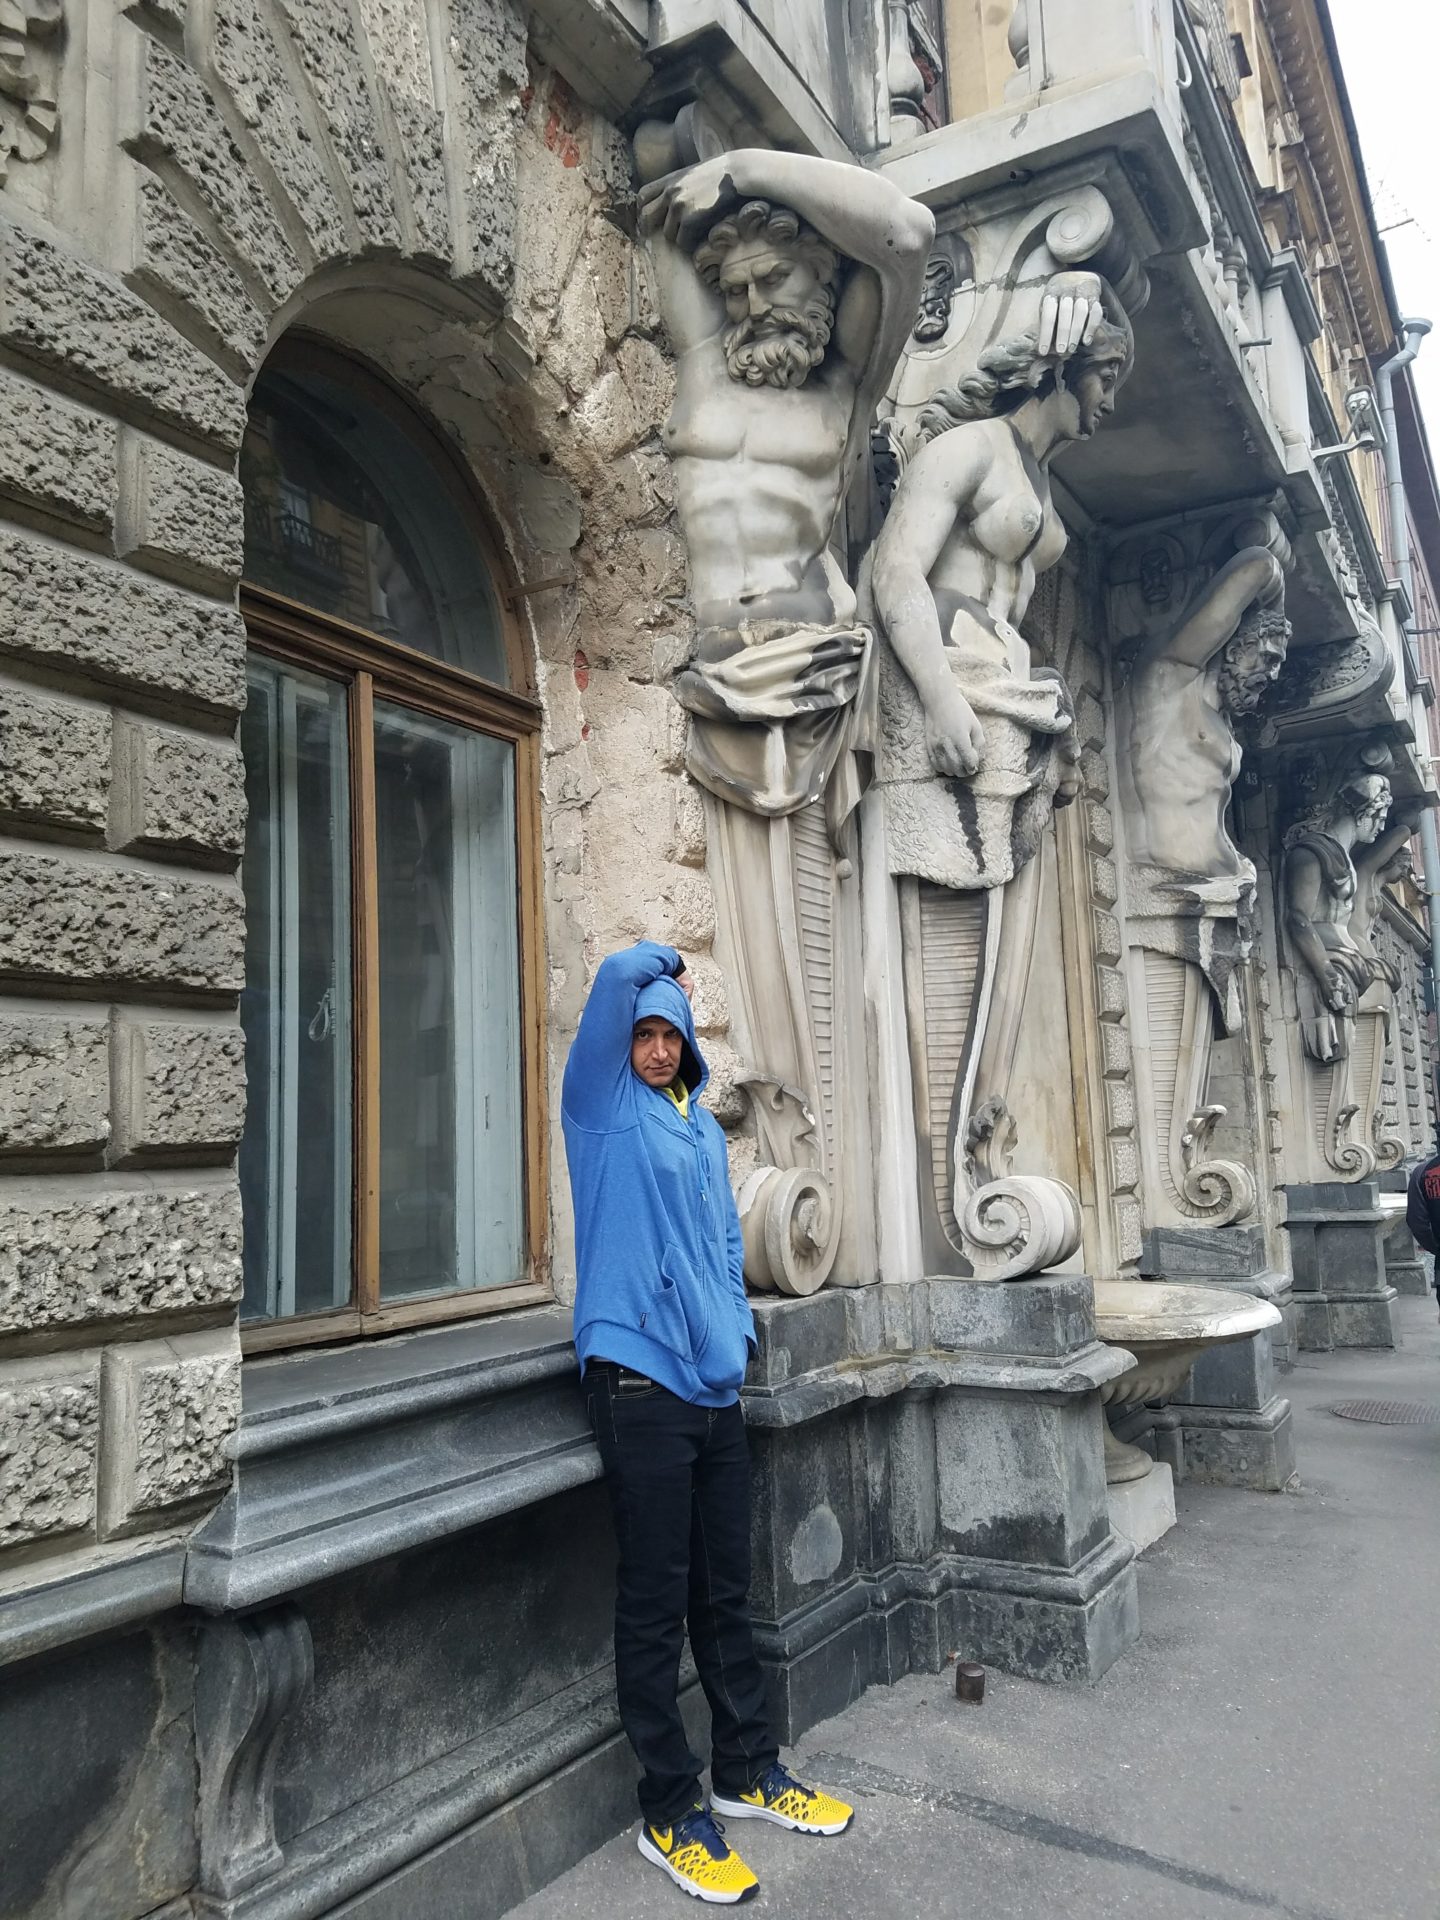 a person standing in front of a building with statues